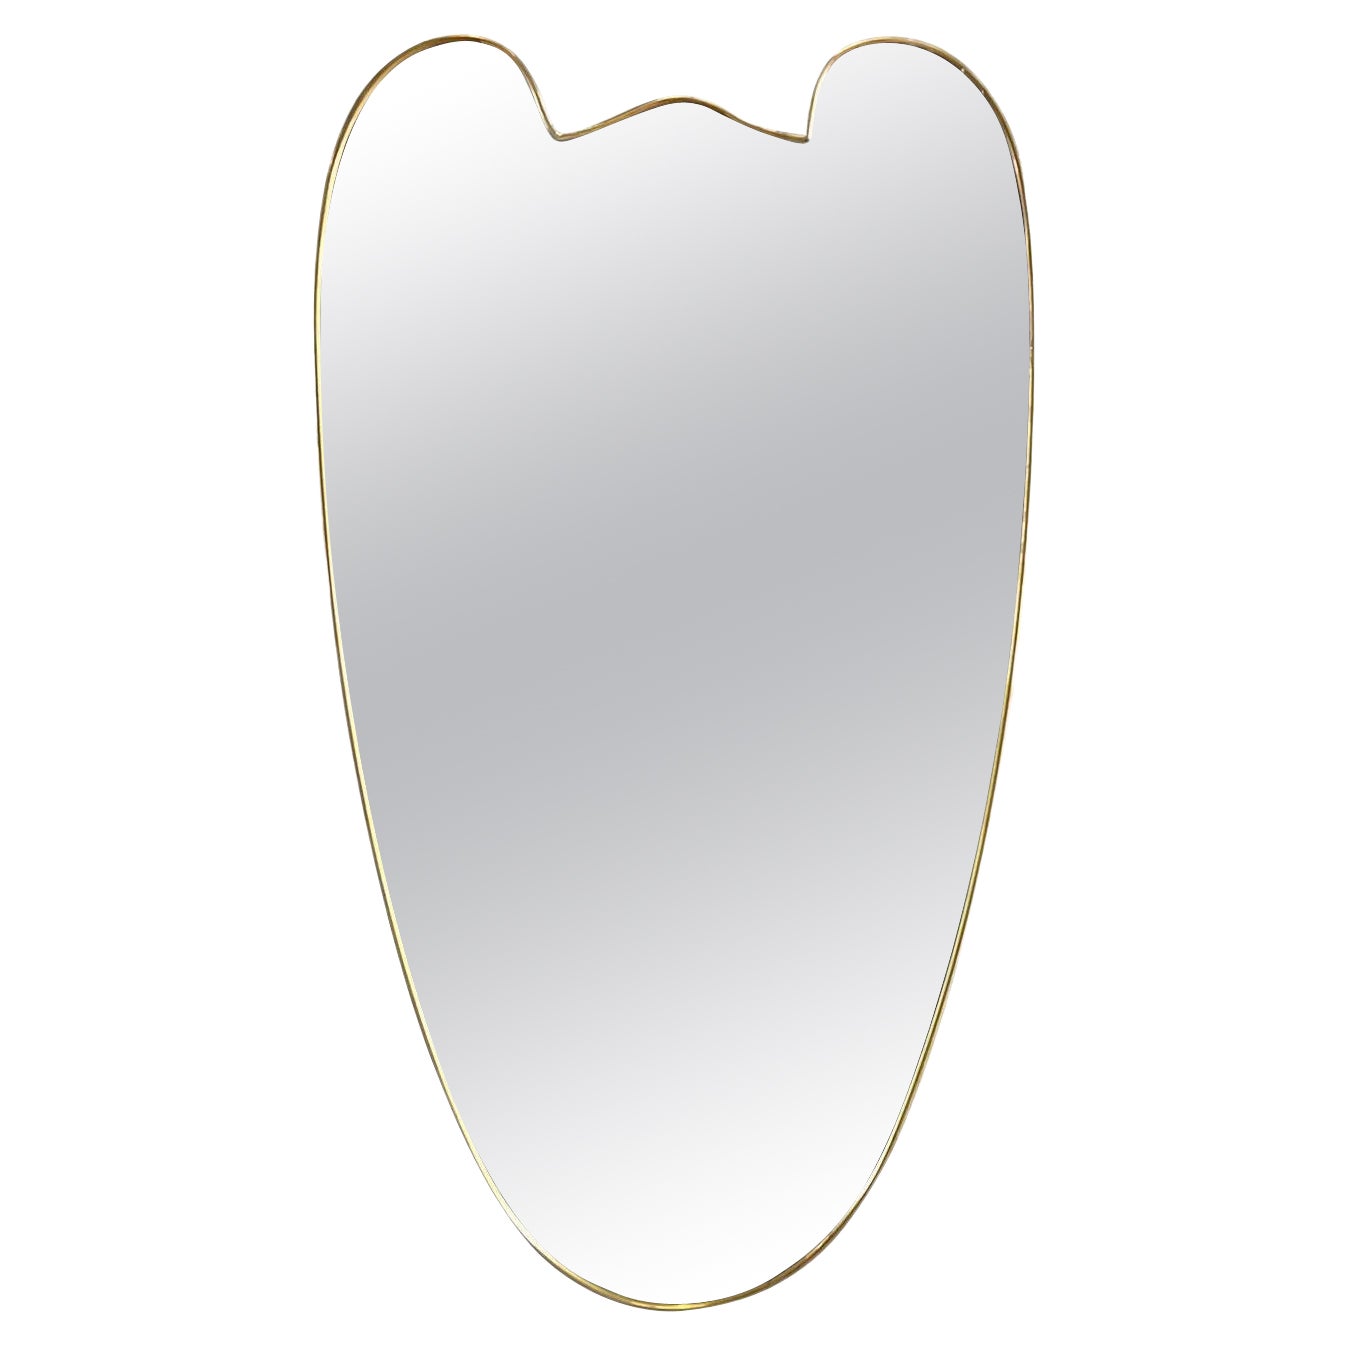 20th Century Italian Mid-Century Modernist Vintage Oval Brass Wall Glass Mirror For Sale